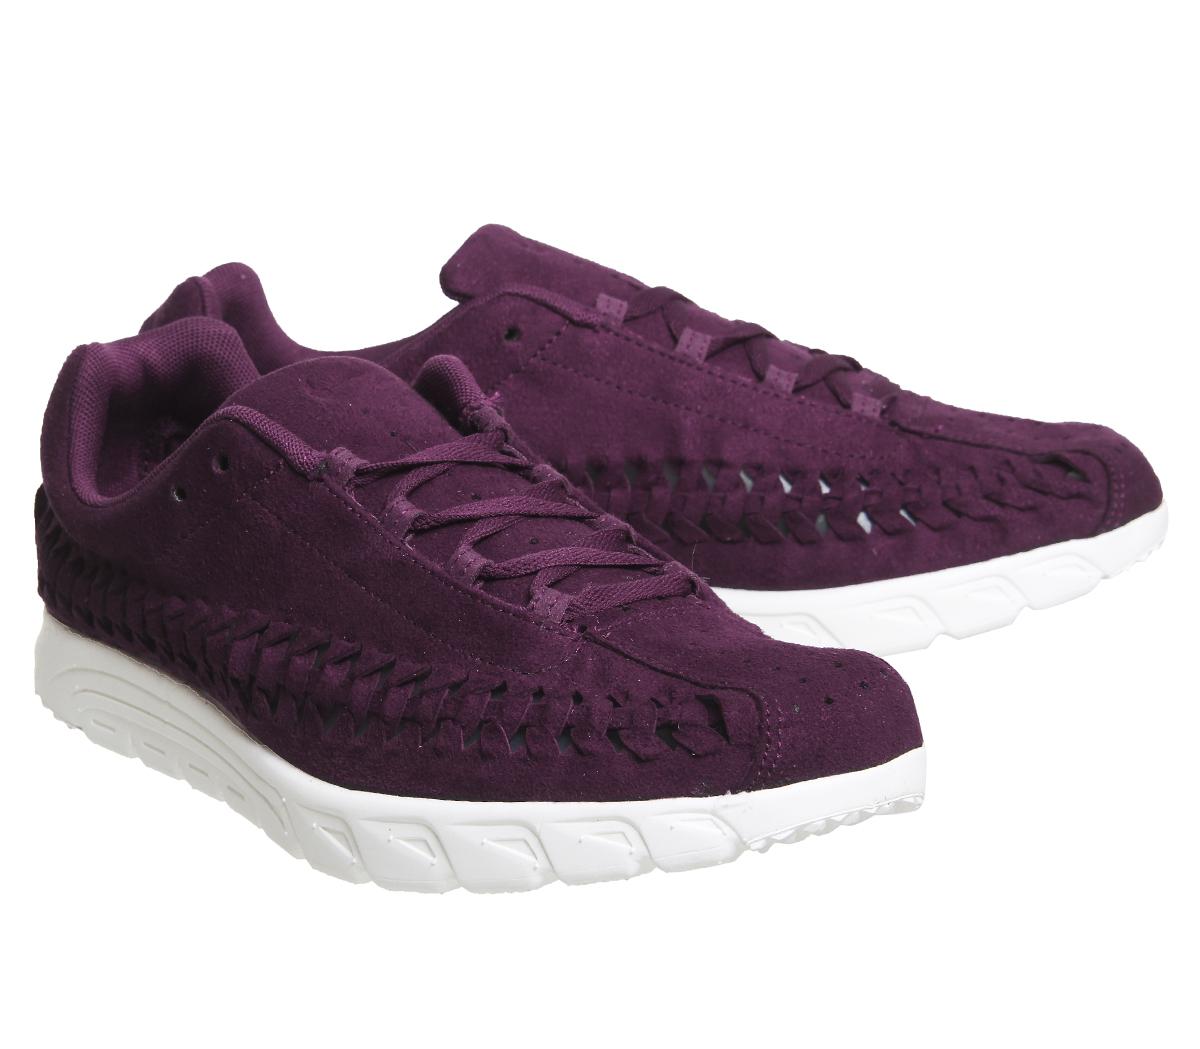 Nike Suede Mayfly Woven Trainers in Burgundy (Purple) - Lyst